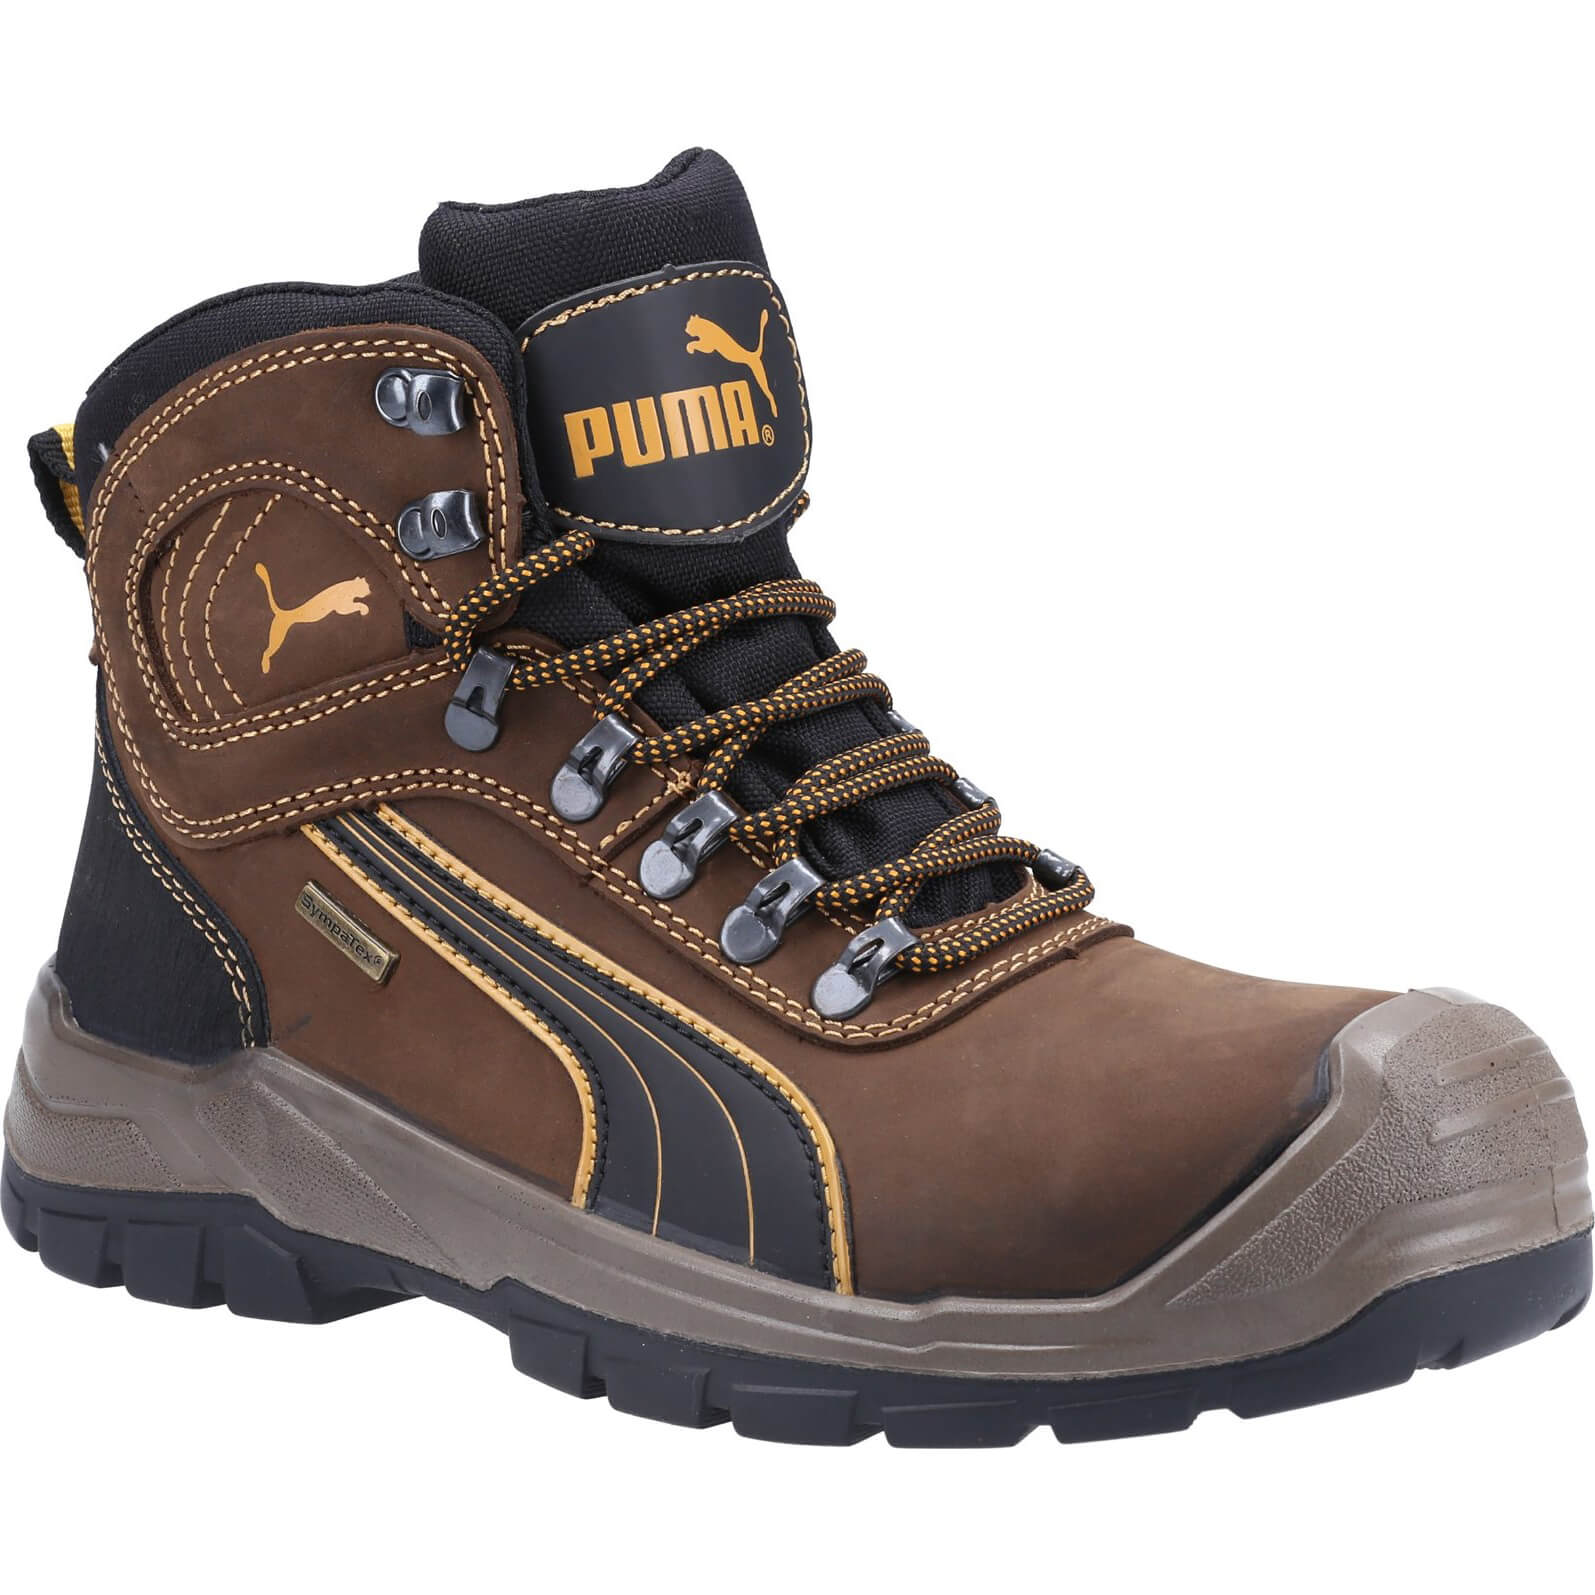 Image of Puma Mens Sierra Nevada Mid Safety Boots Brown Size 11